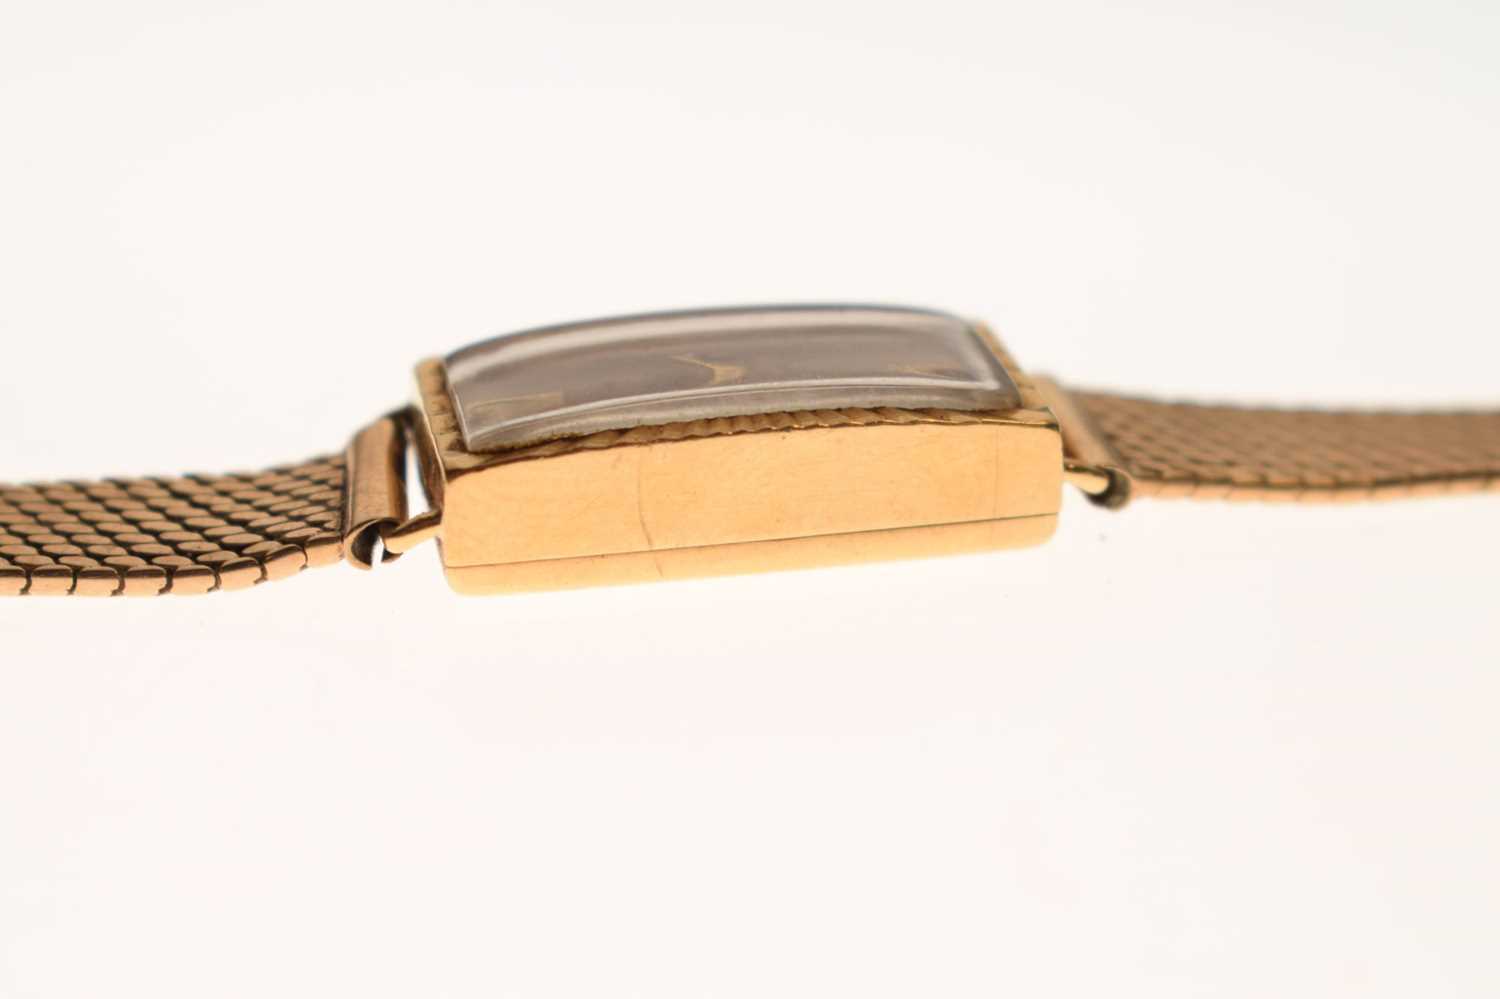 Watches of Switzerland - Lady's 18ct gold cased bracelet watch - Image 5 of 9